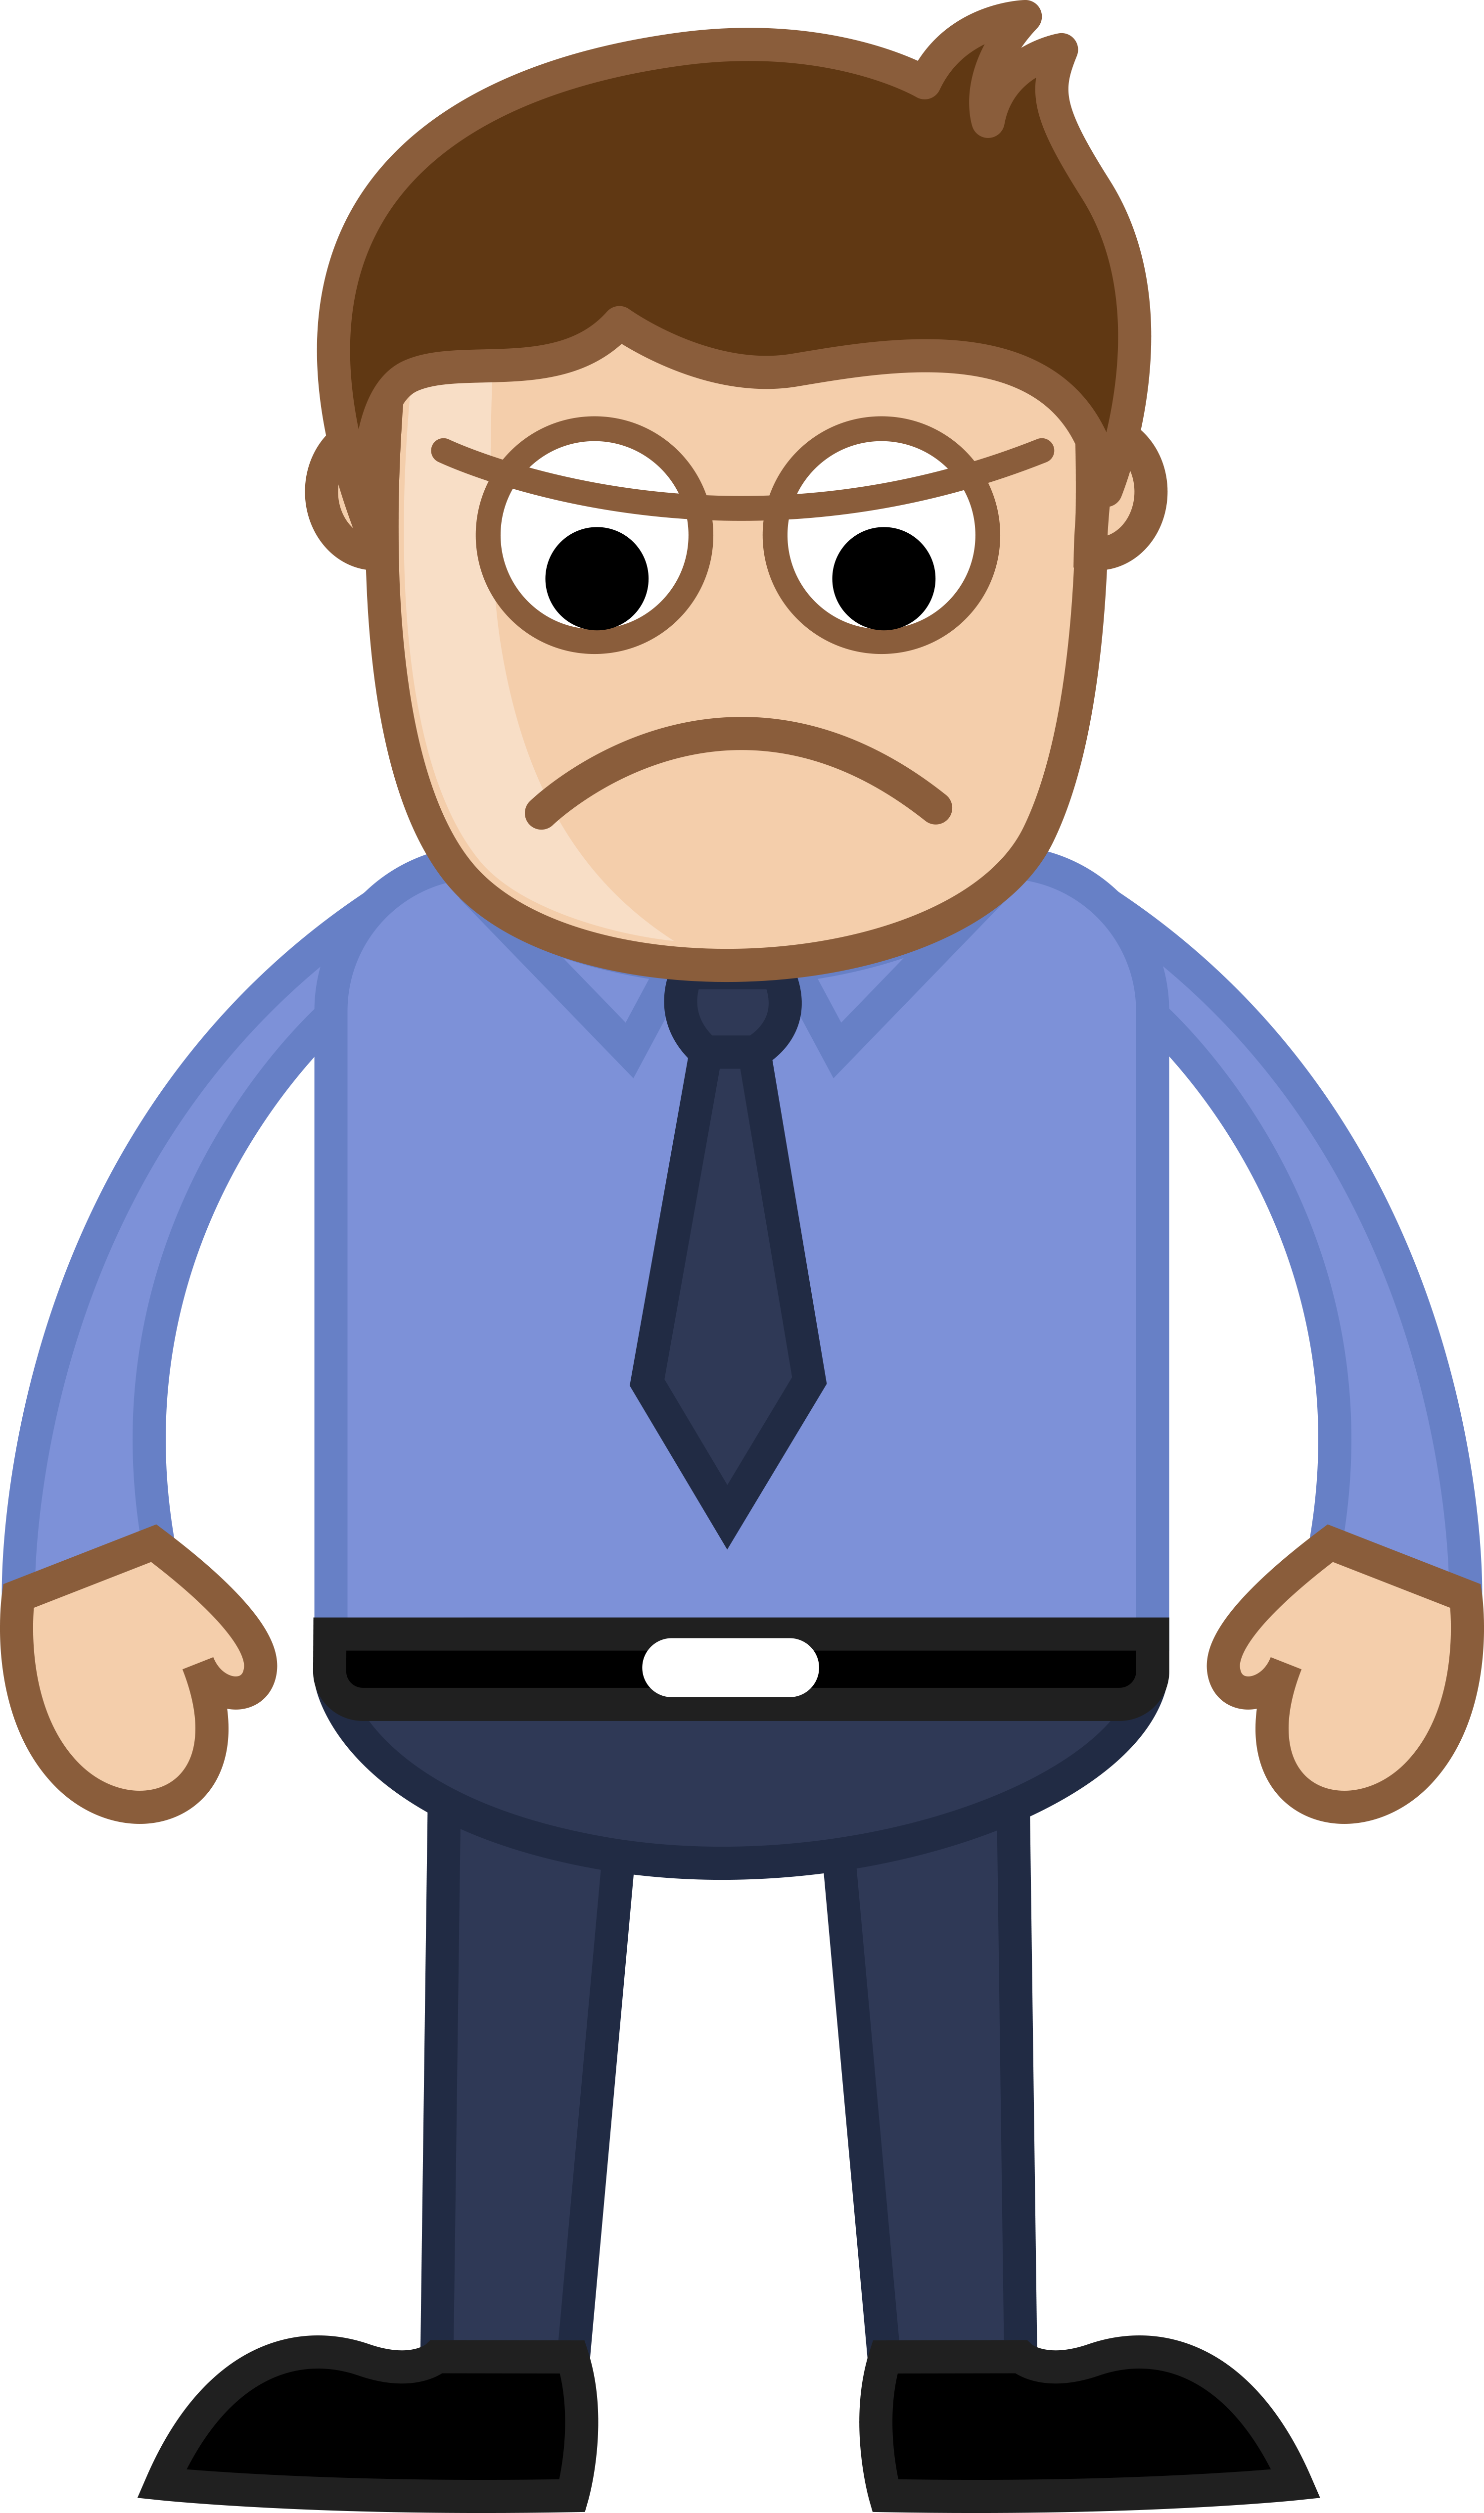 Yelling clipart boss staff. Day cartoon image funny